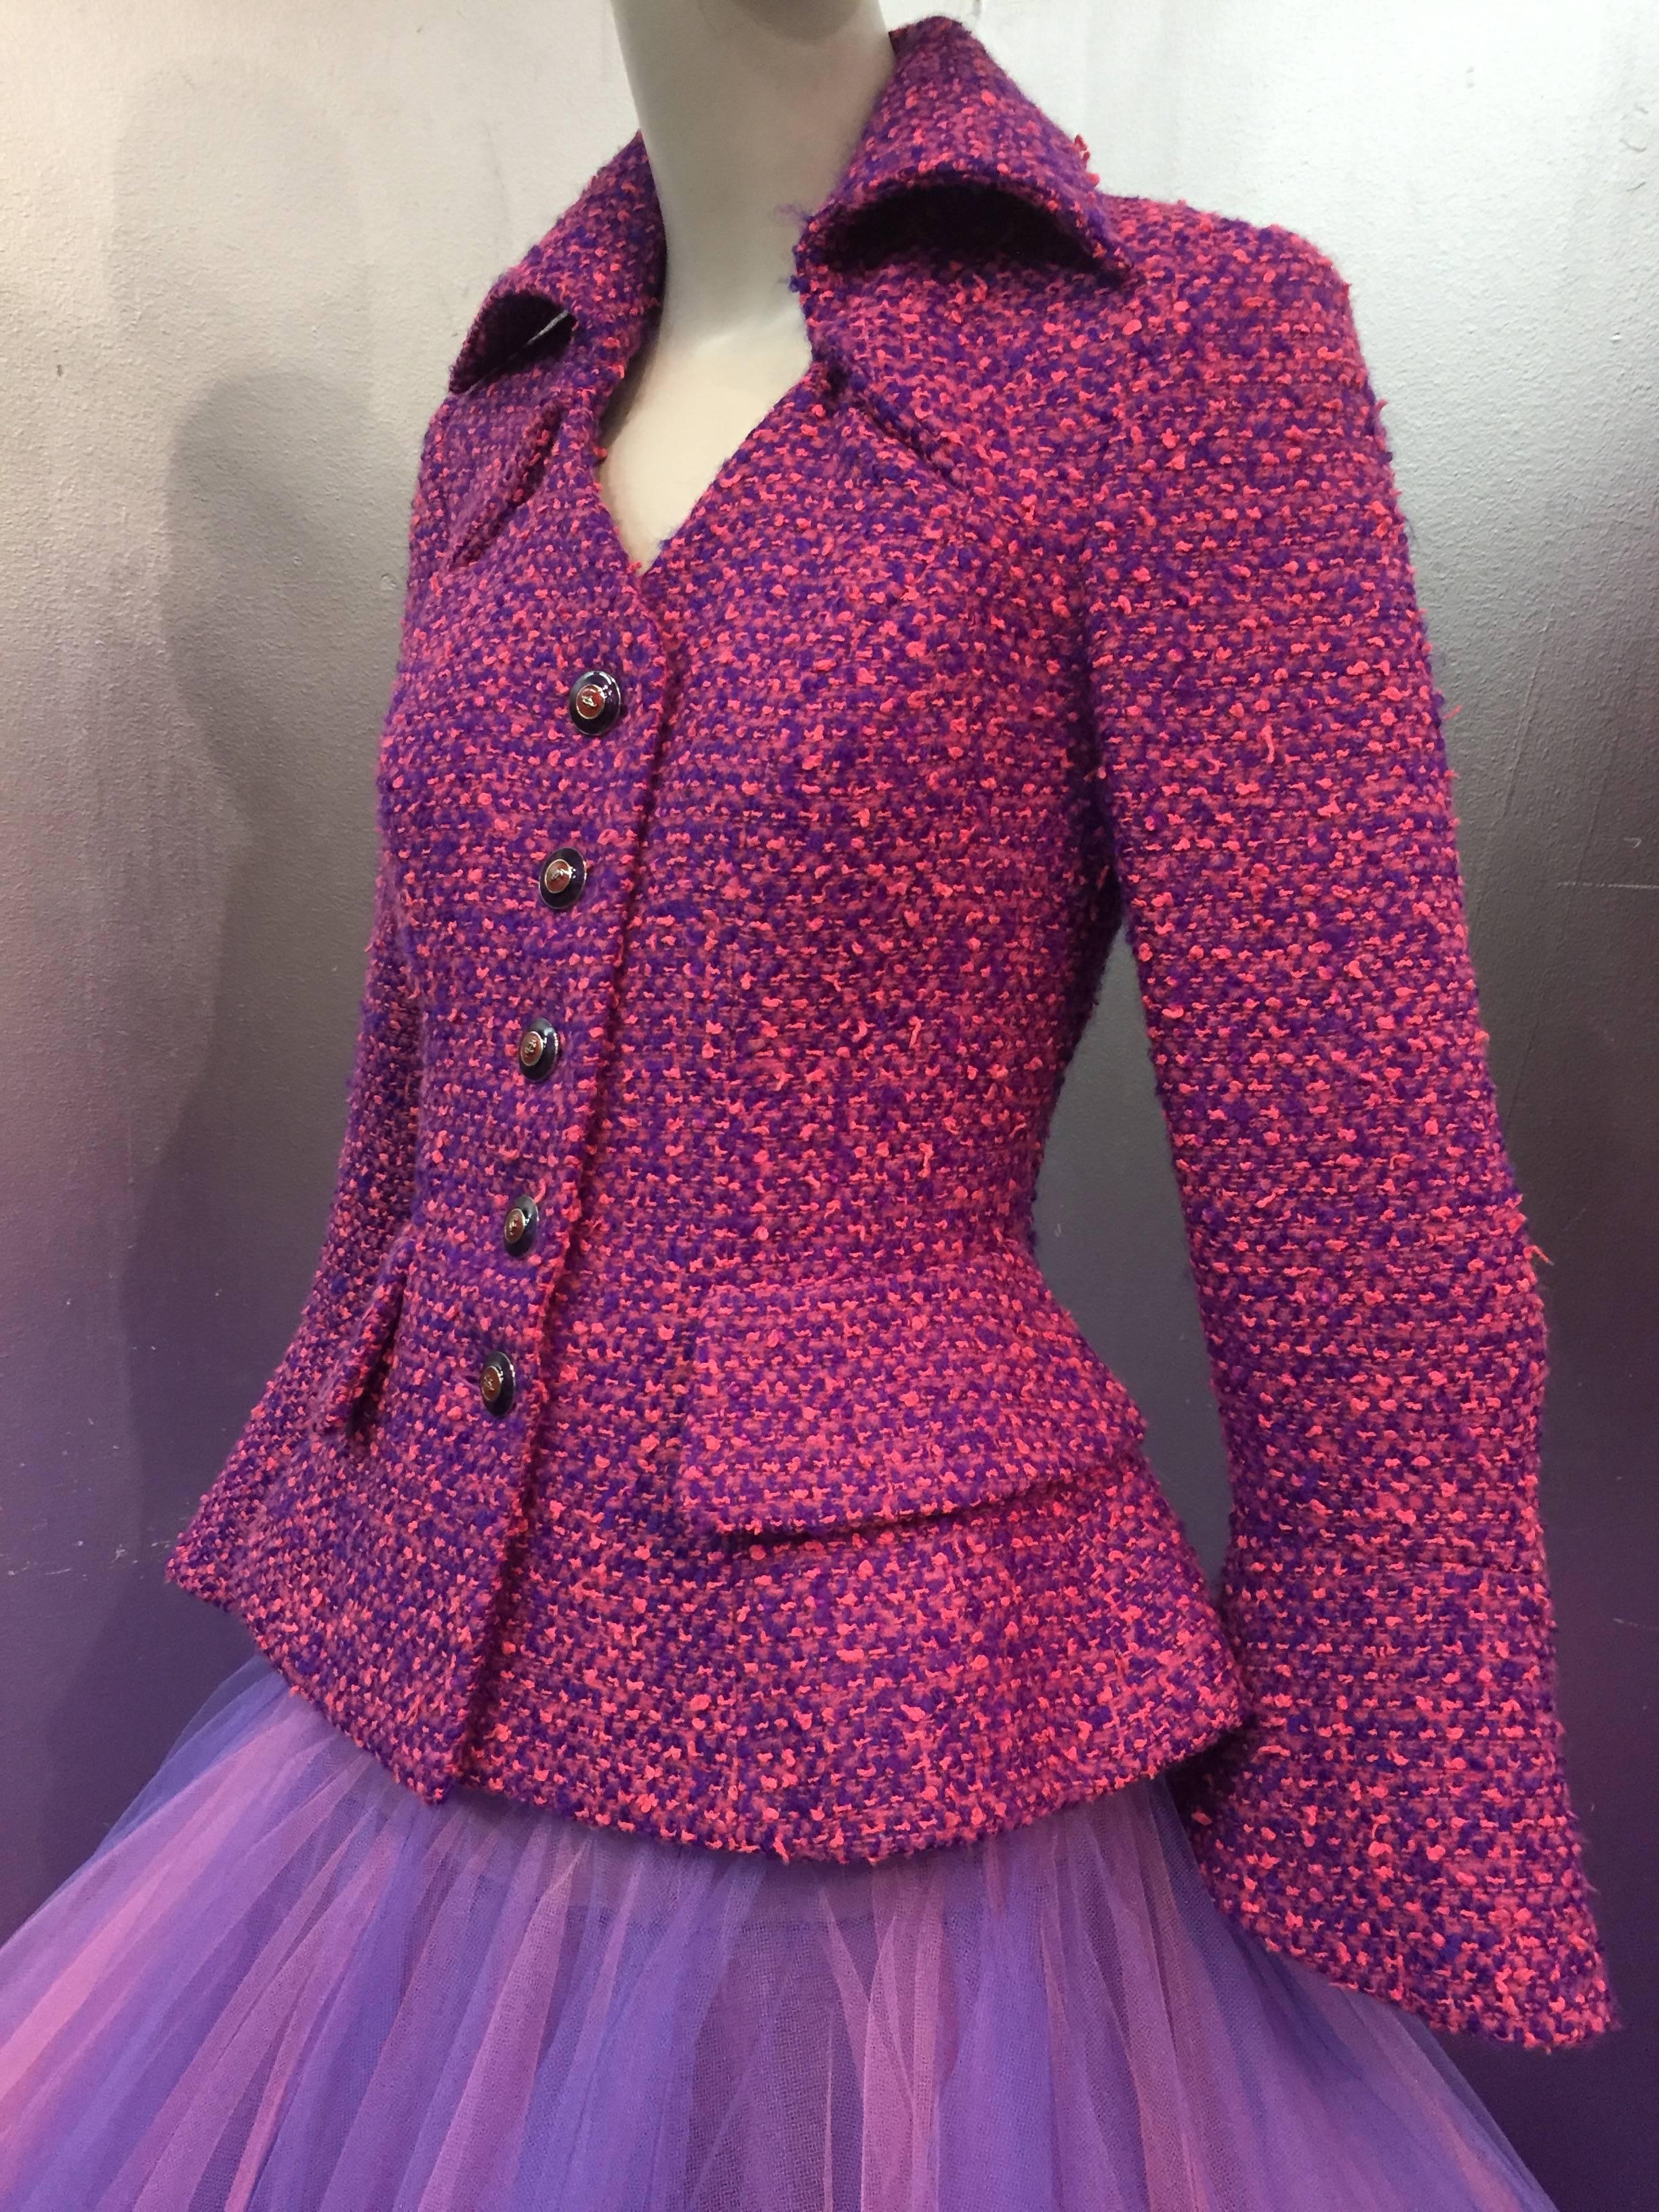 1990 JACQUES FATH Wool Tweed Jacket and Tulle Ball Skirt in Pink and Purple  2